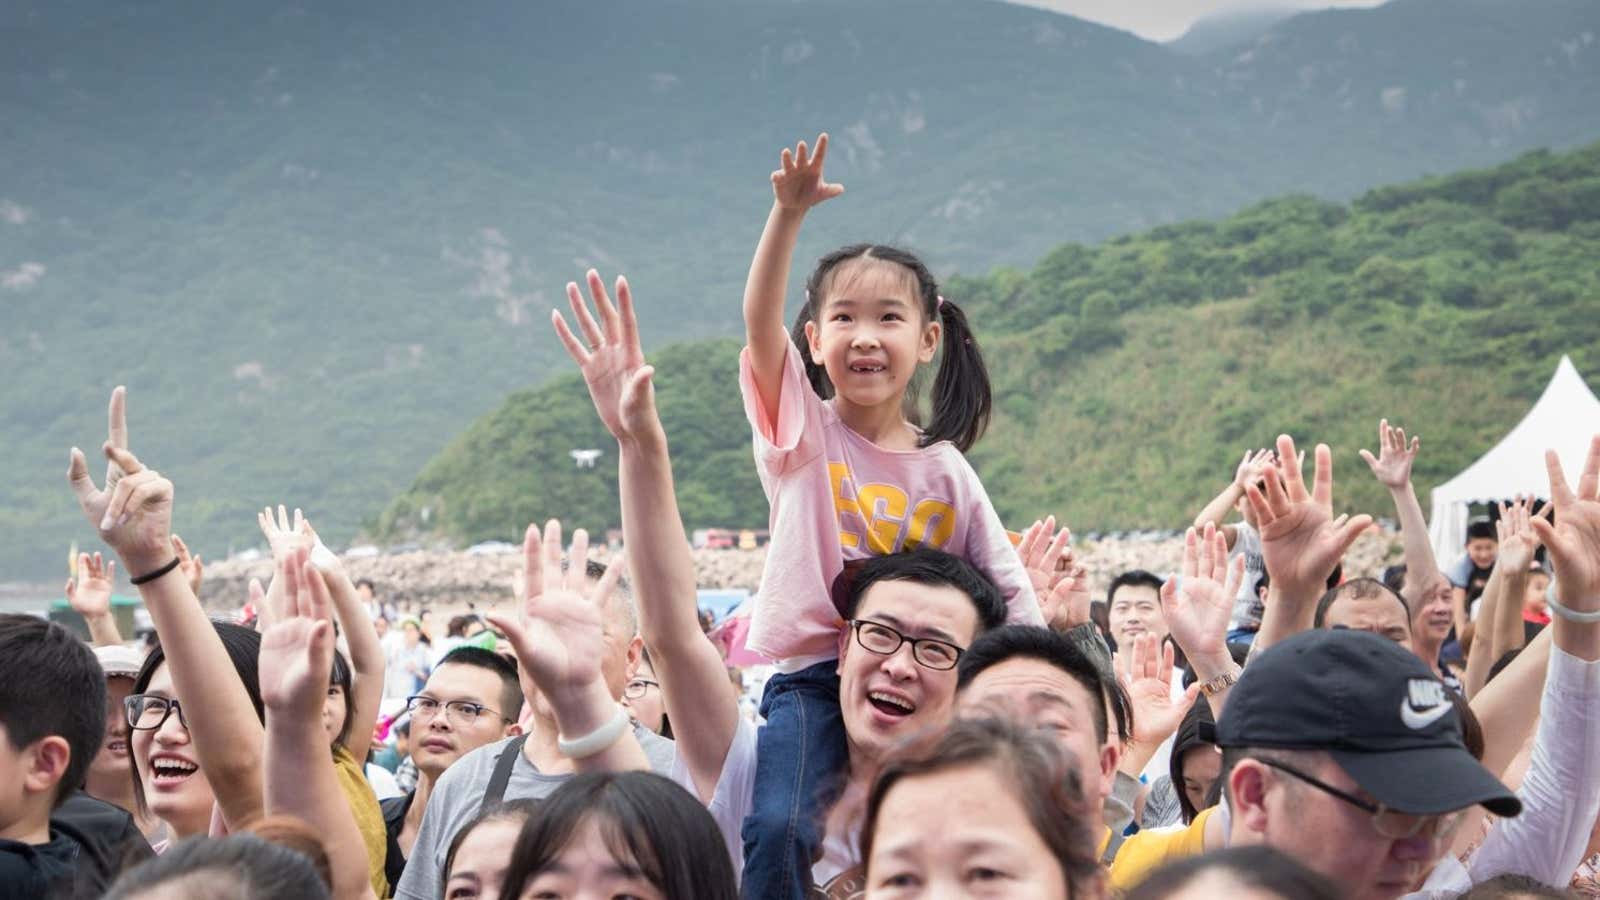 The kid-friendly live music experience remains largely untapped in China. Will a pandemic change that?